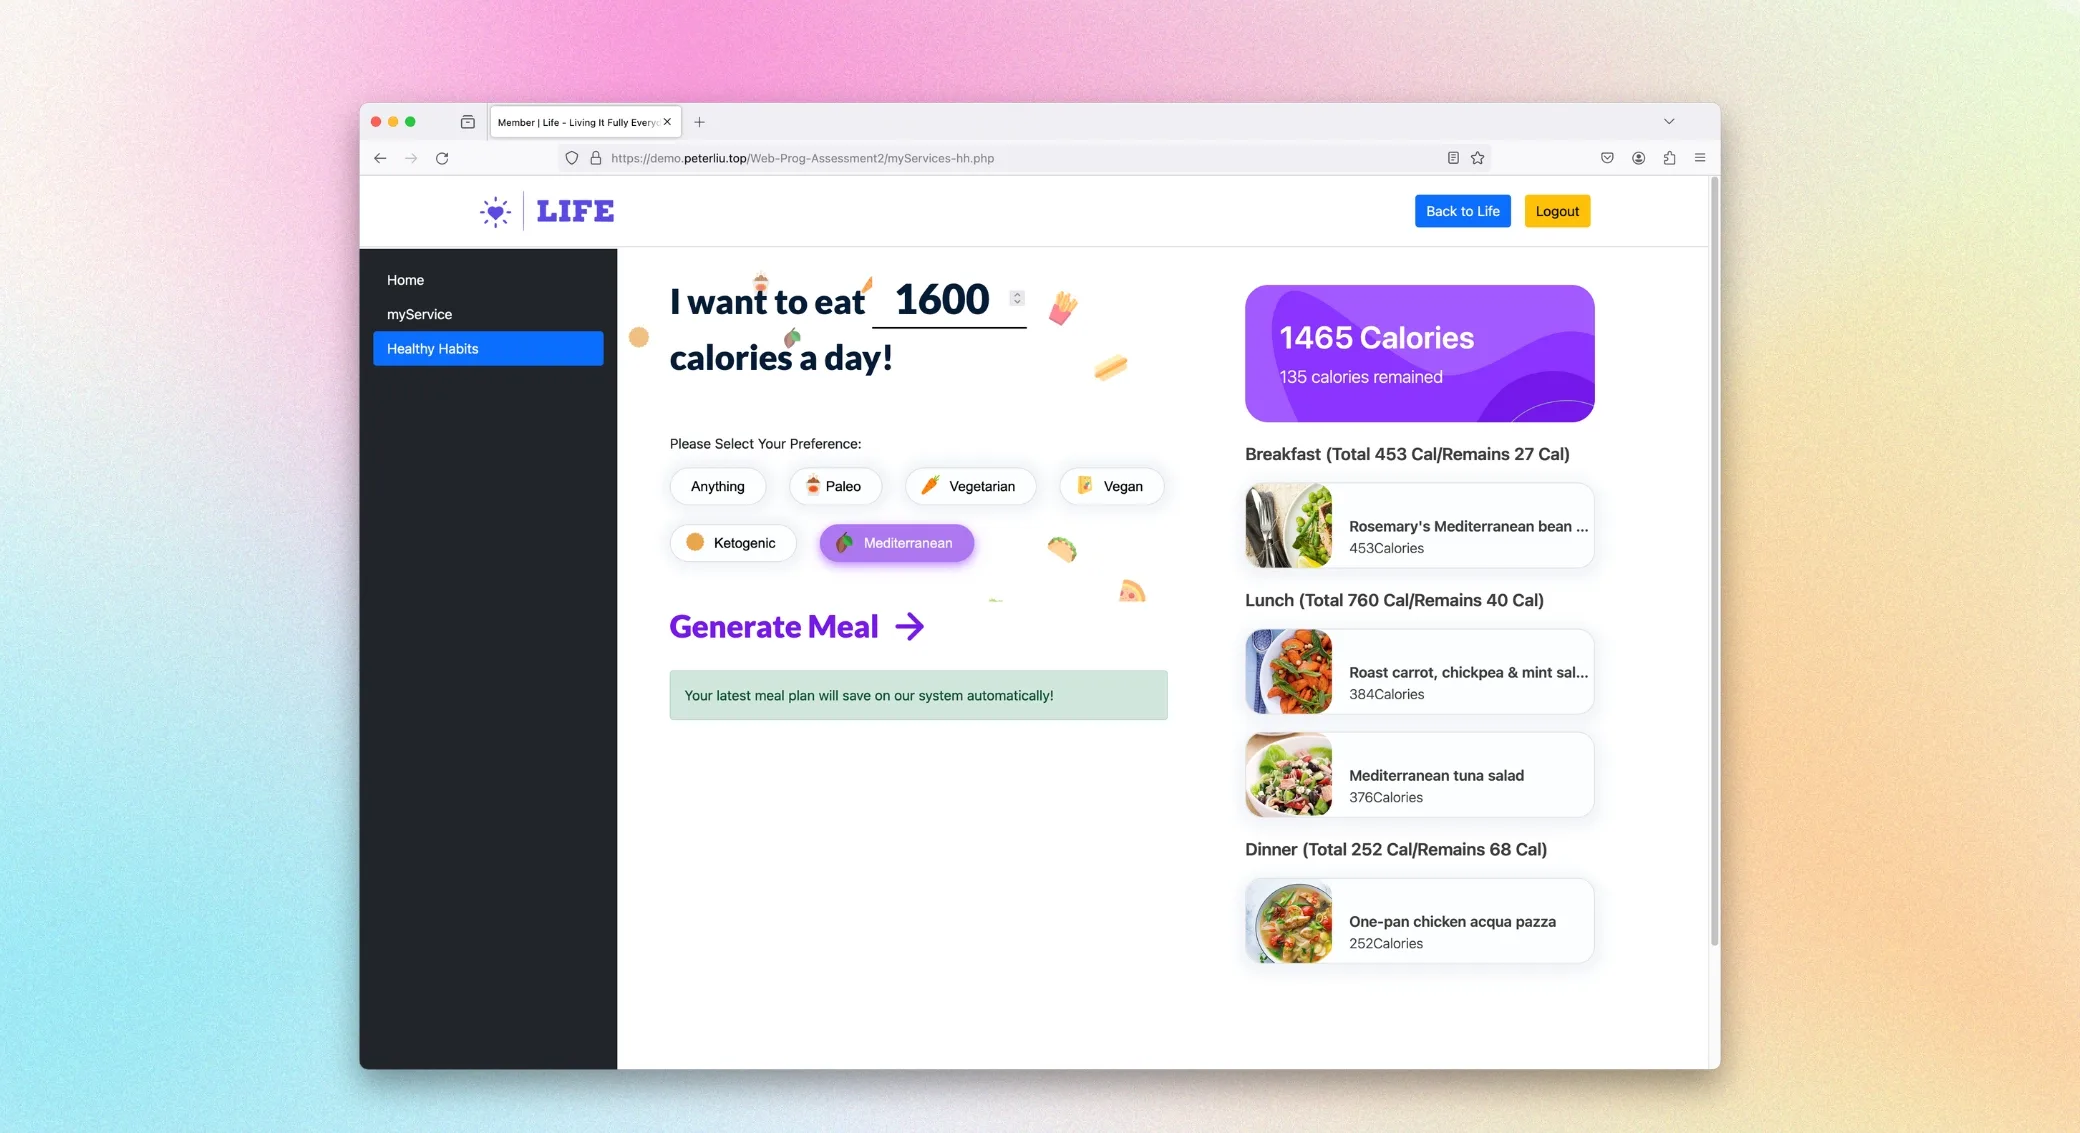 Membership: diet calculator developed by JQuery, MYSQL and PHP